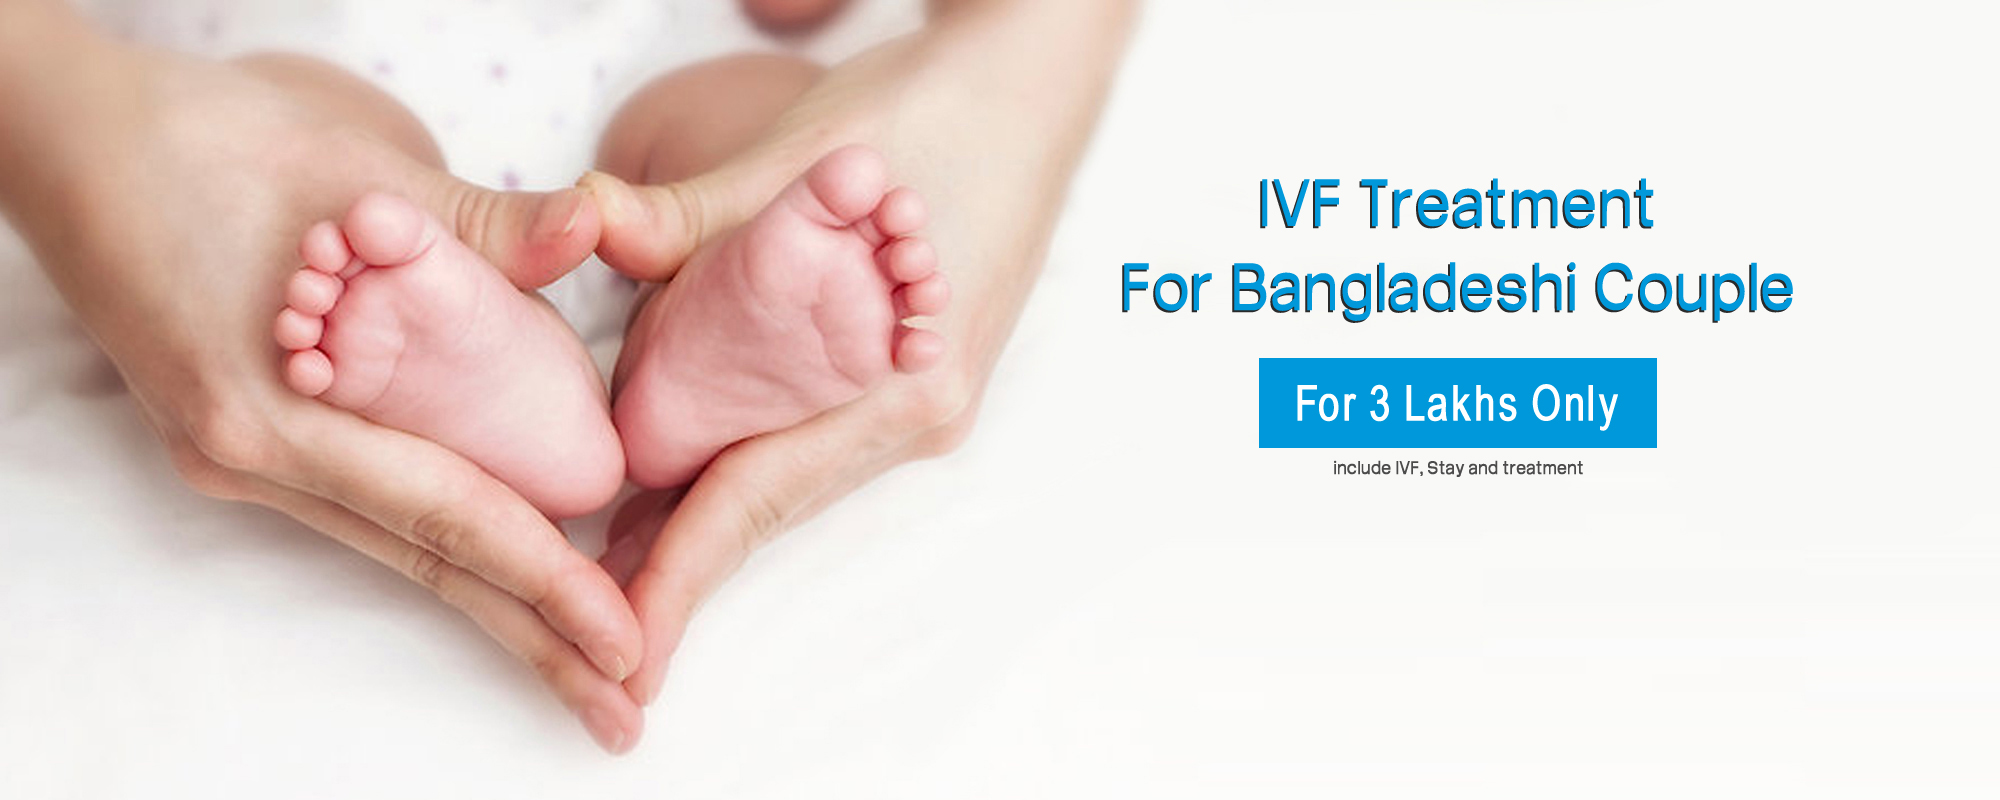 IVF Treatment For Bangladeshi Couple For 3 Lakhs Only 4